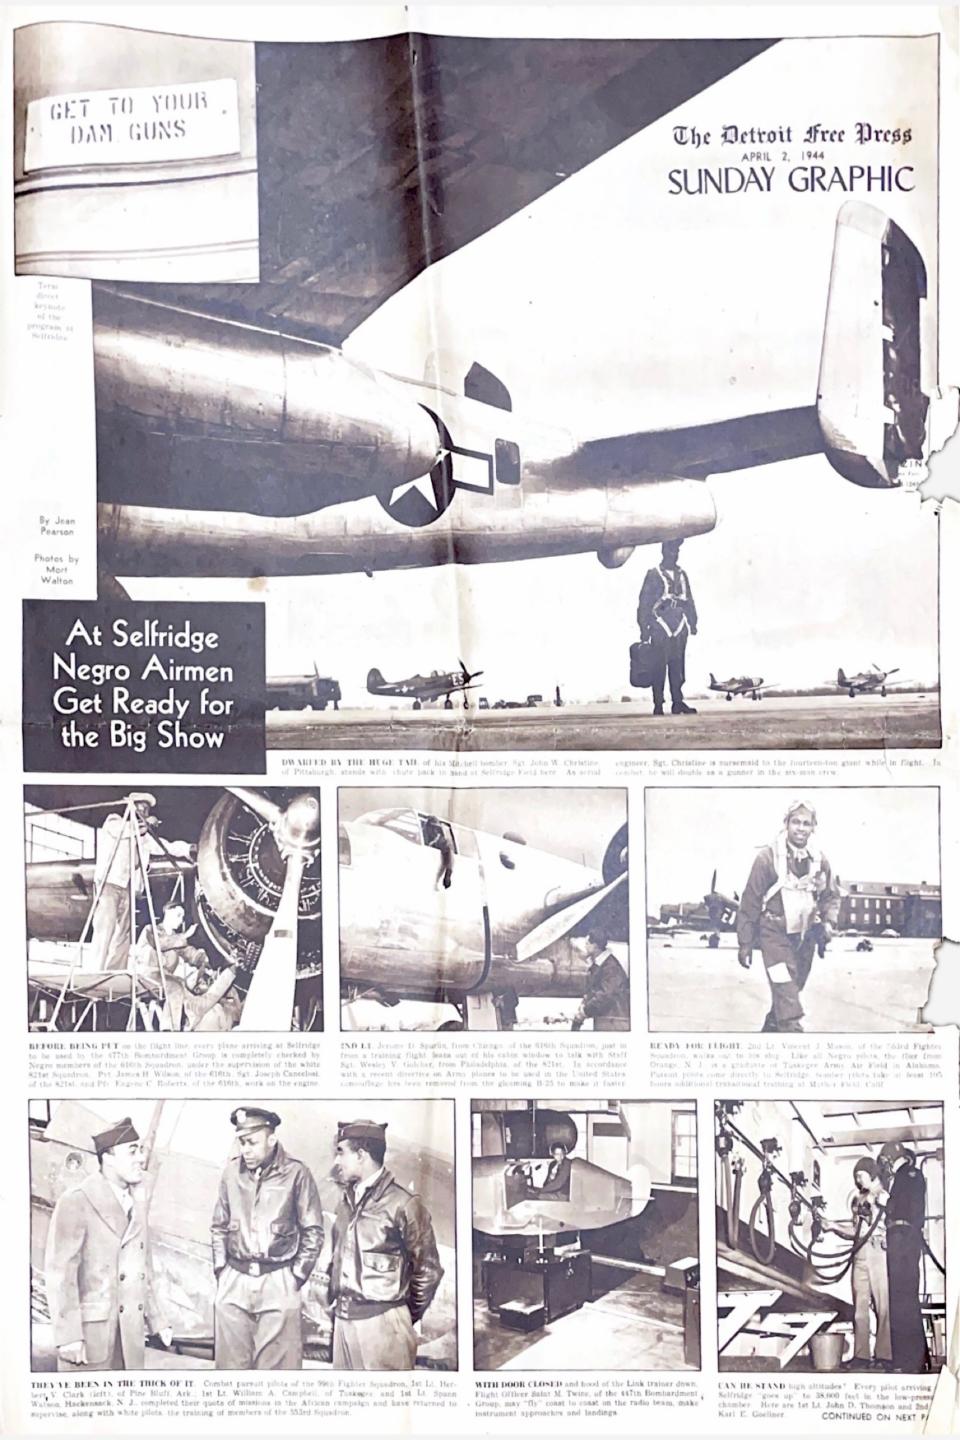 A Detroit Free Press Sunday Graphic story written by Jean Pearson and published on April 2, 1944, illustrated the happenings at Selfridge Airfield as the remaining Tuskegee Airmen continued their training.